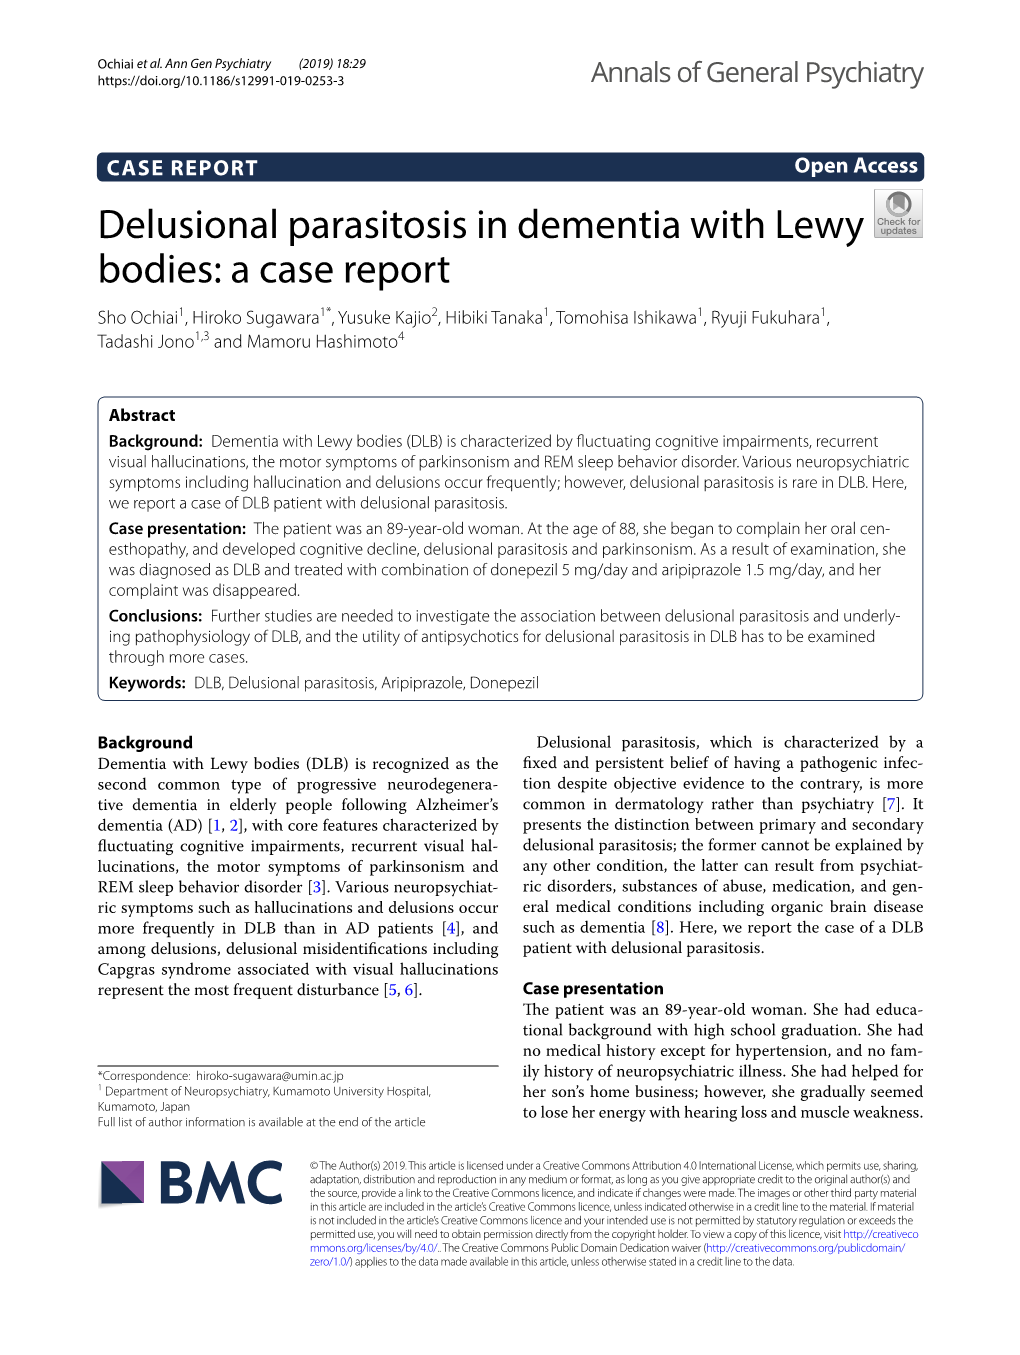 Delusional Parasitosis in Dementia With